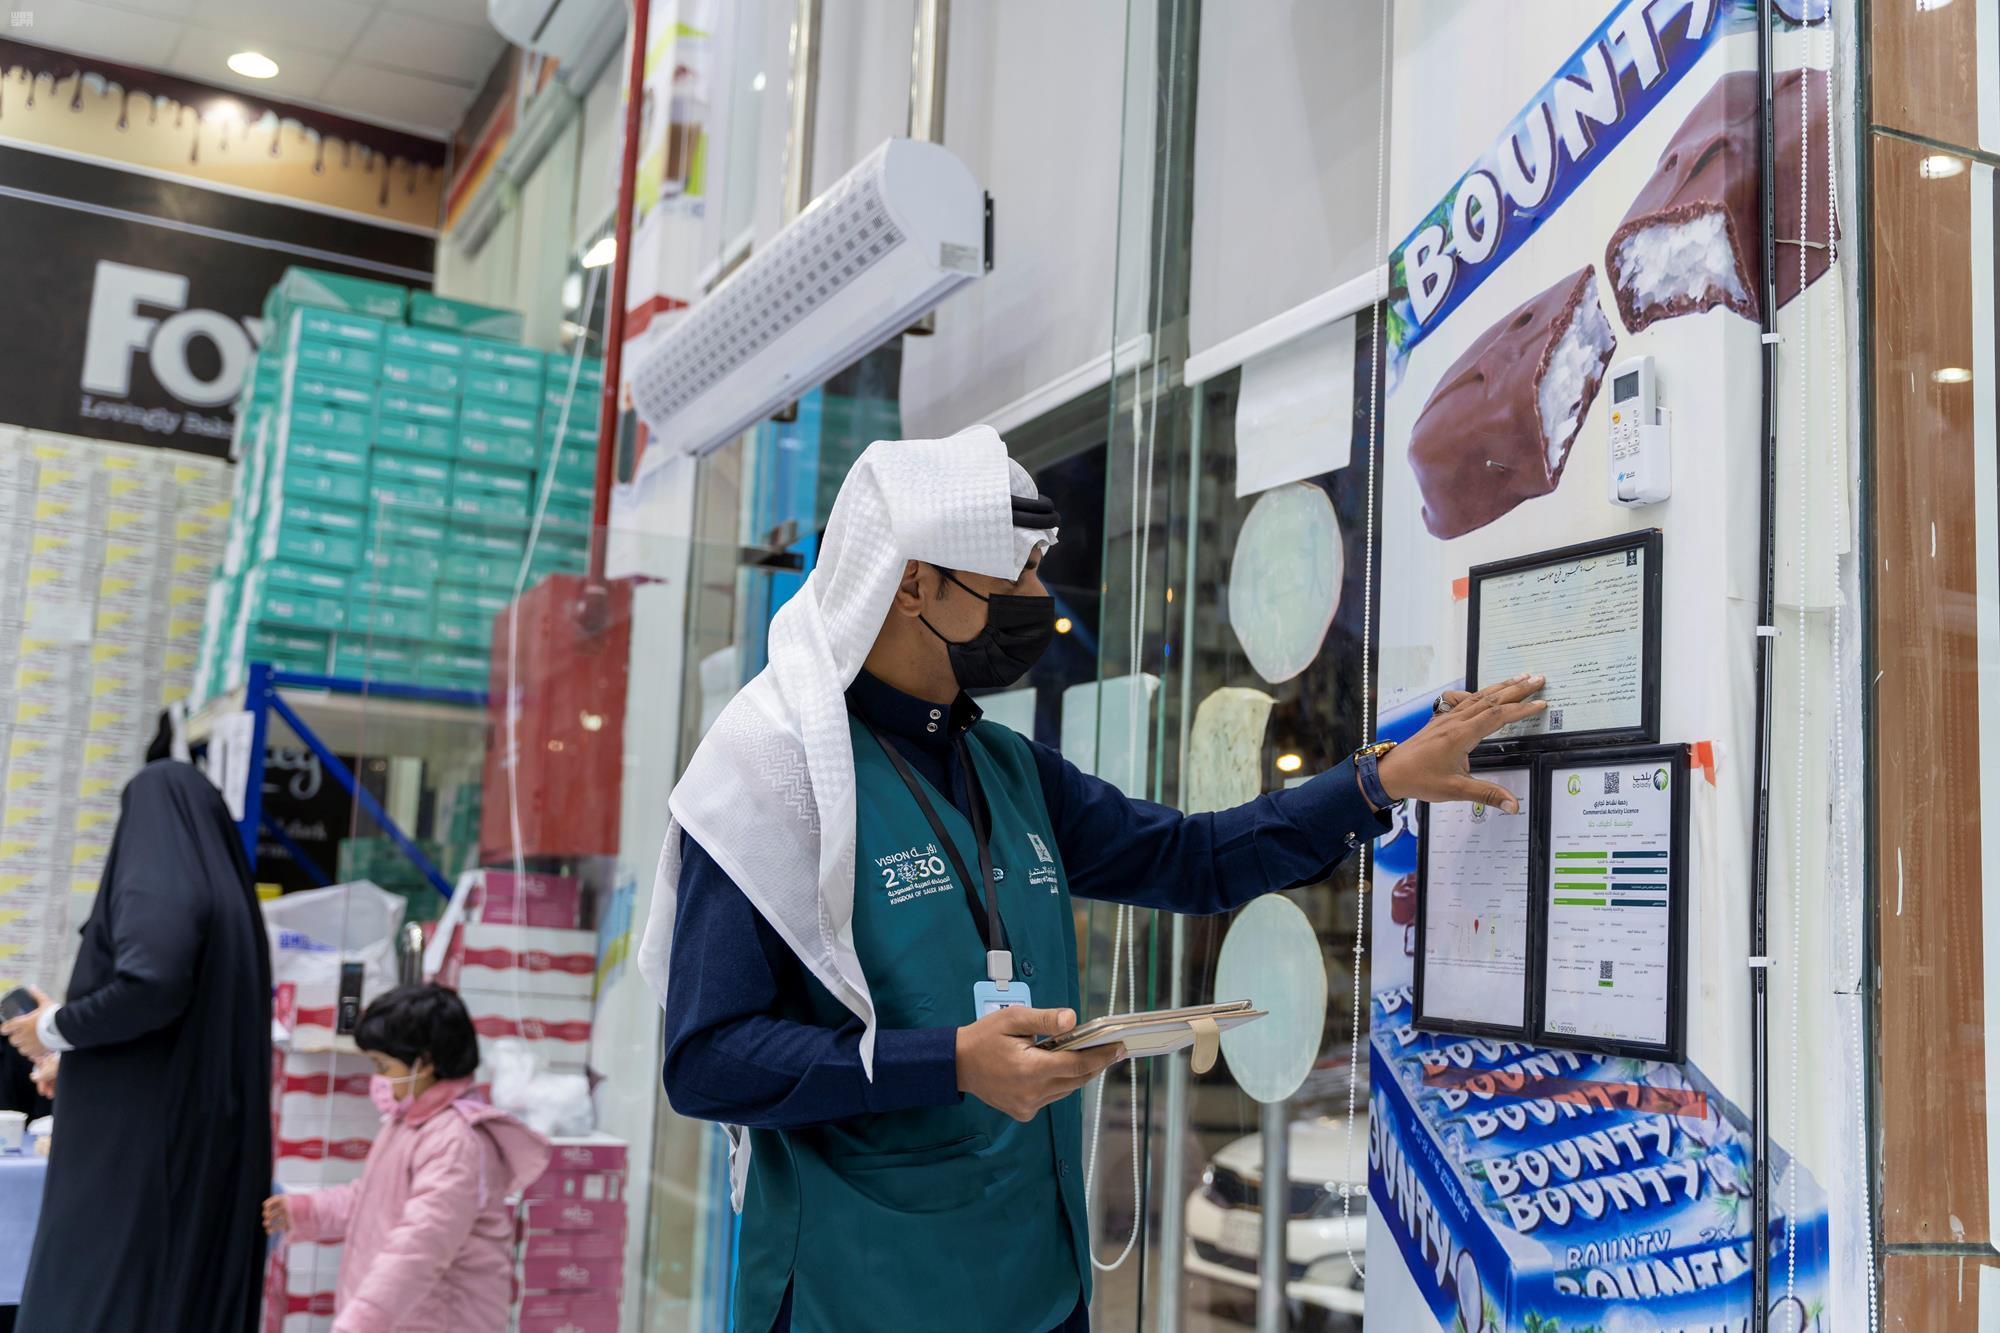 A Saudi official inspects a shop in Riyadh to check compliance with anti-coronavirus regulations. (SPA)